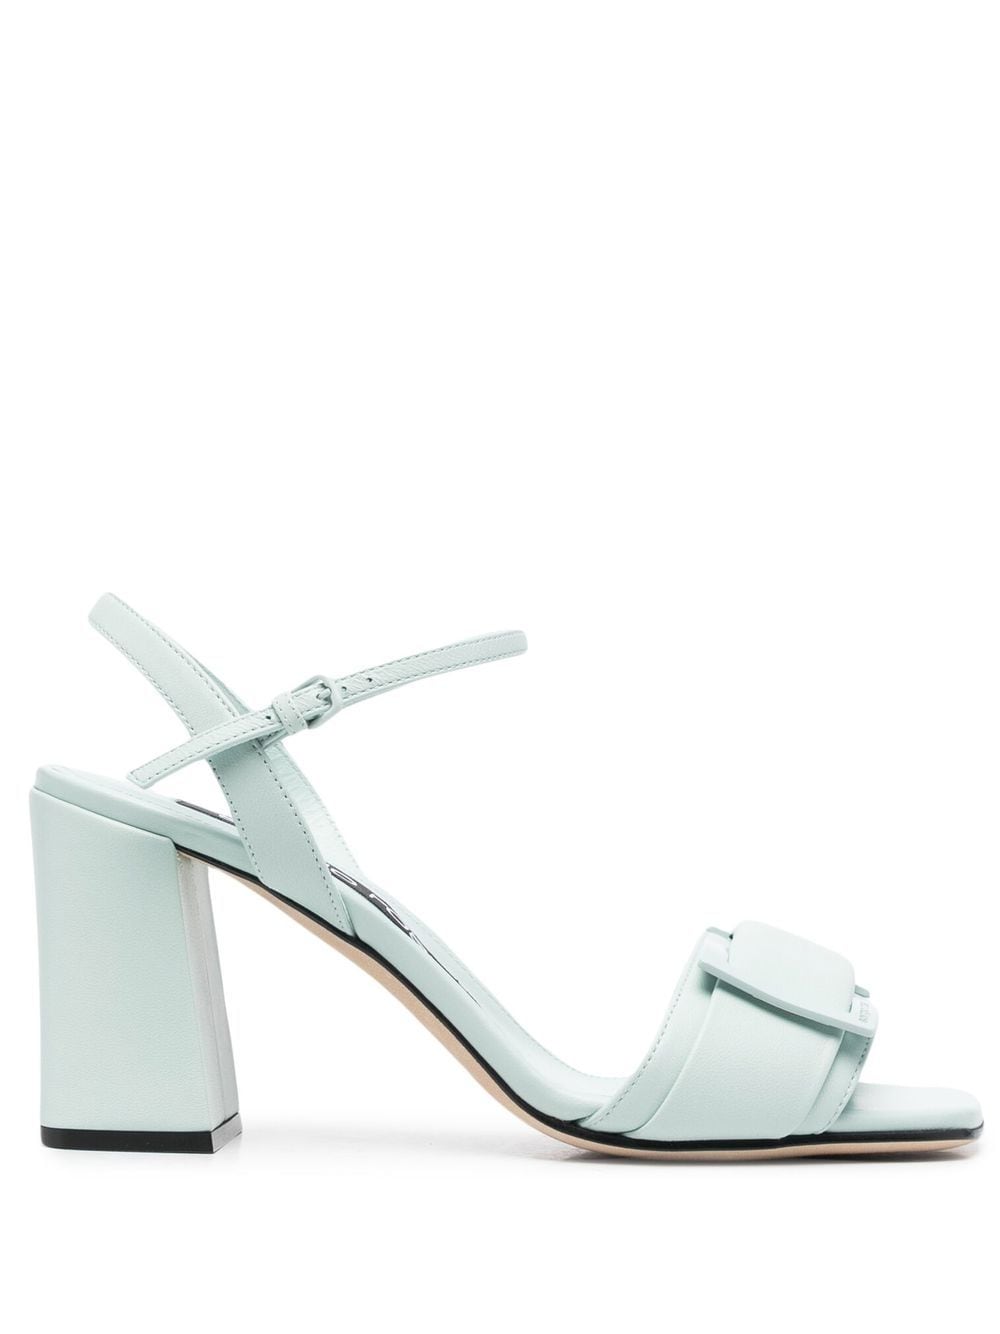 Image 1 of Sergio Rossi Prince leather sandals